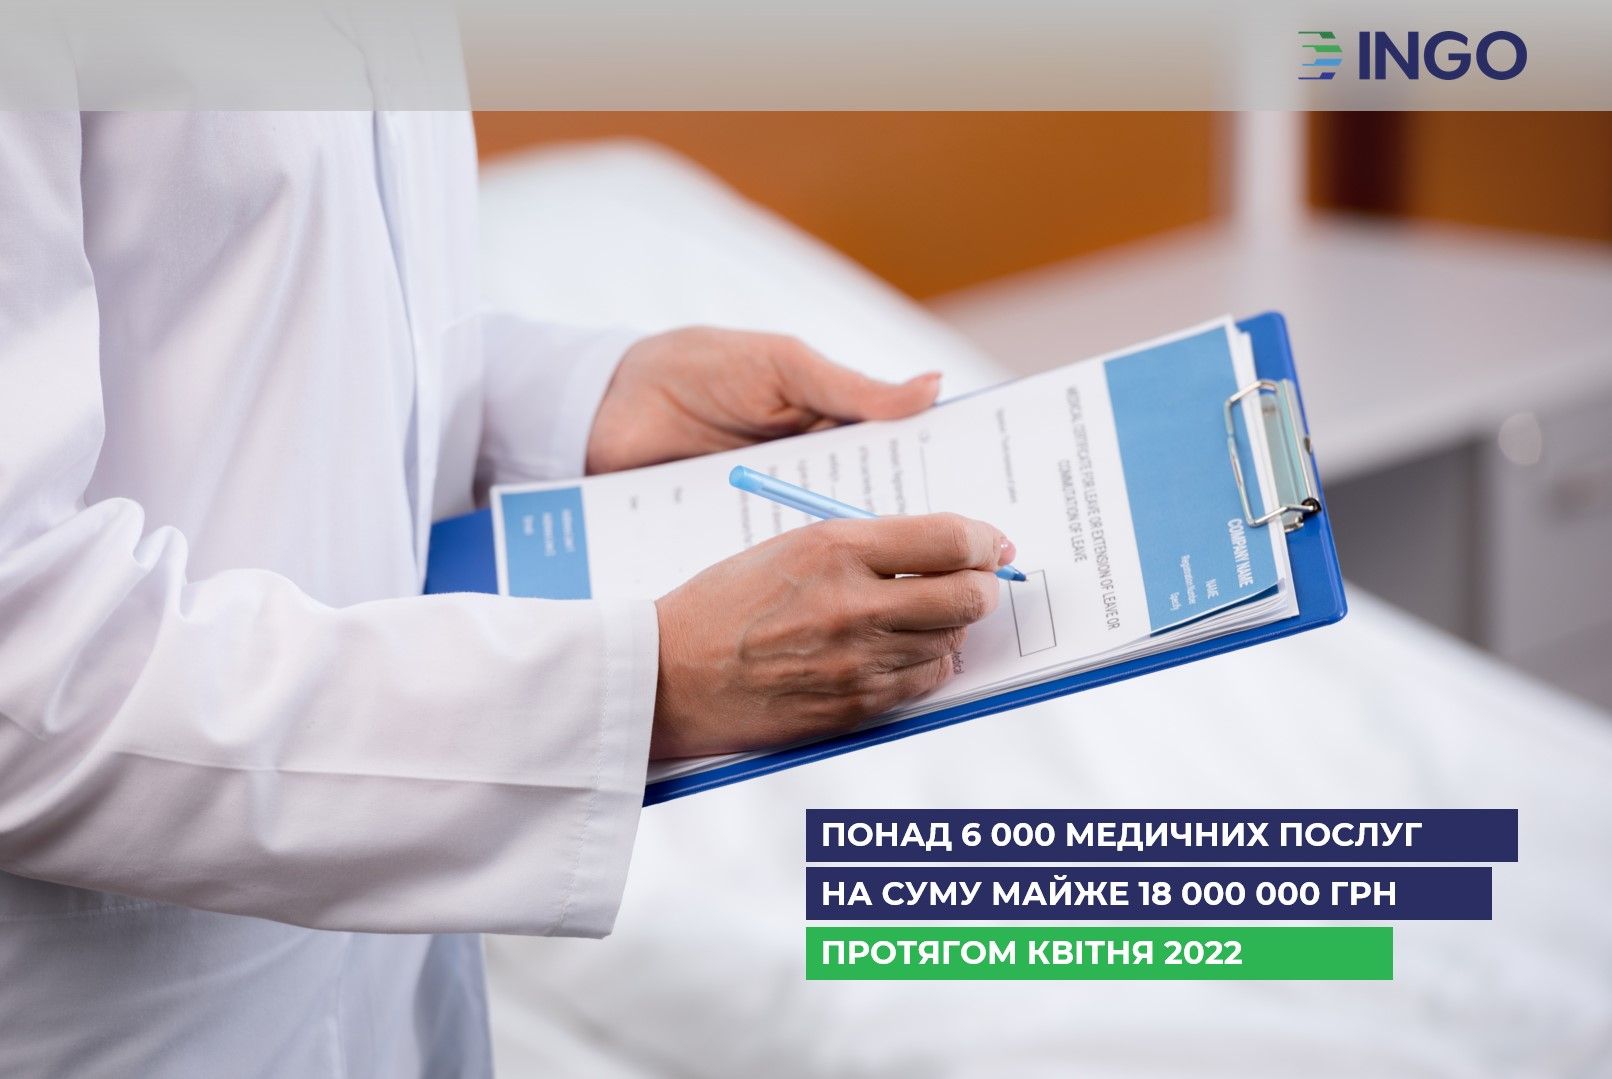 Significant Increase in the Number of Medical Services Provided in April